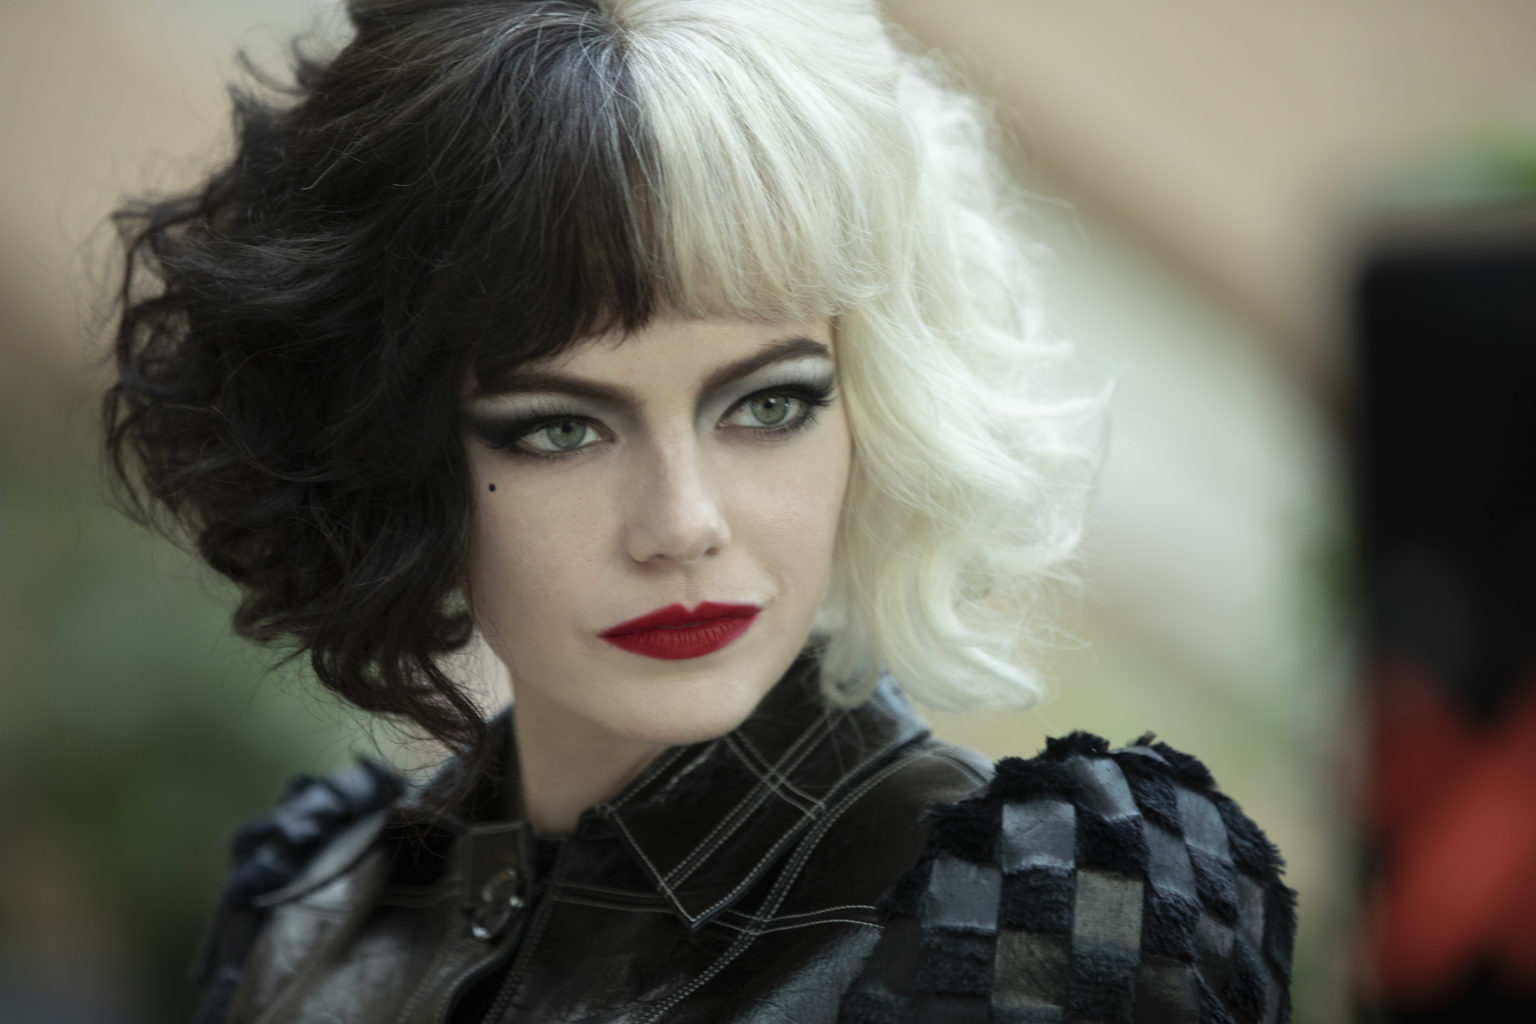 Will Emma Stone be the first actress to bare it all as part of the cast of 'The Curse'? Let's take a peek.